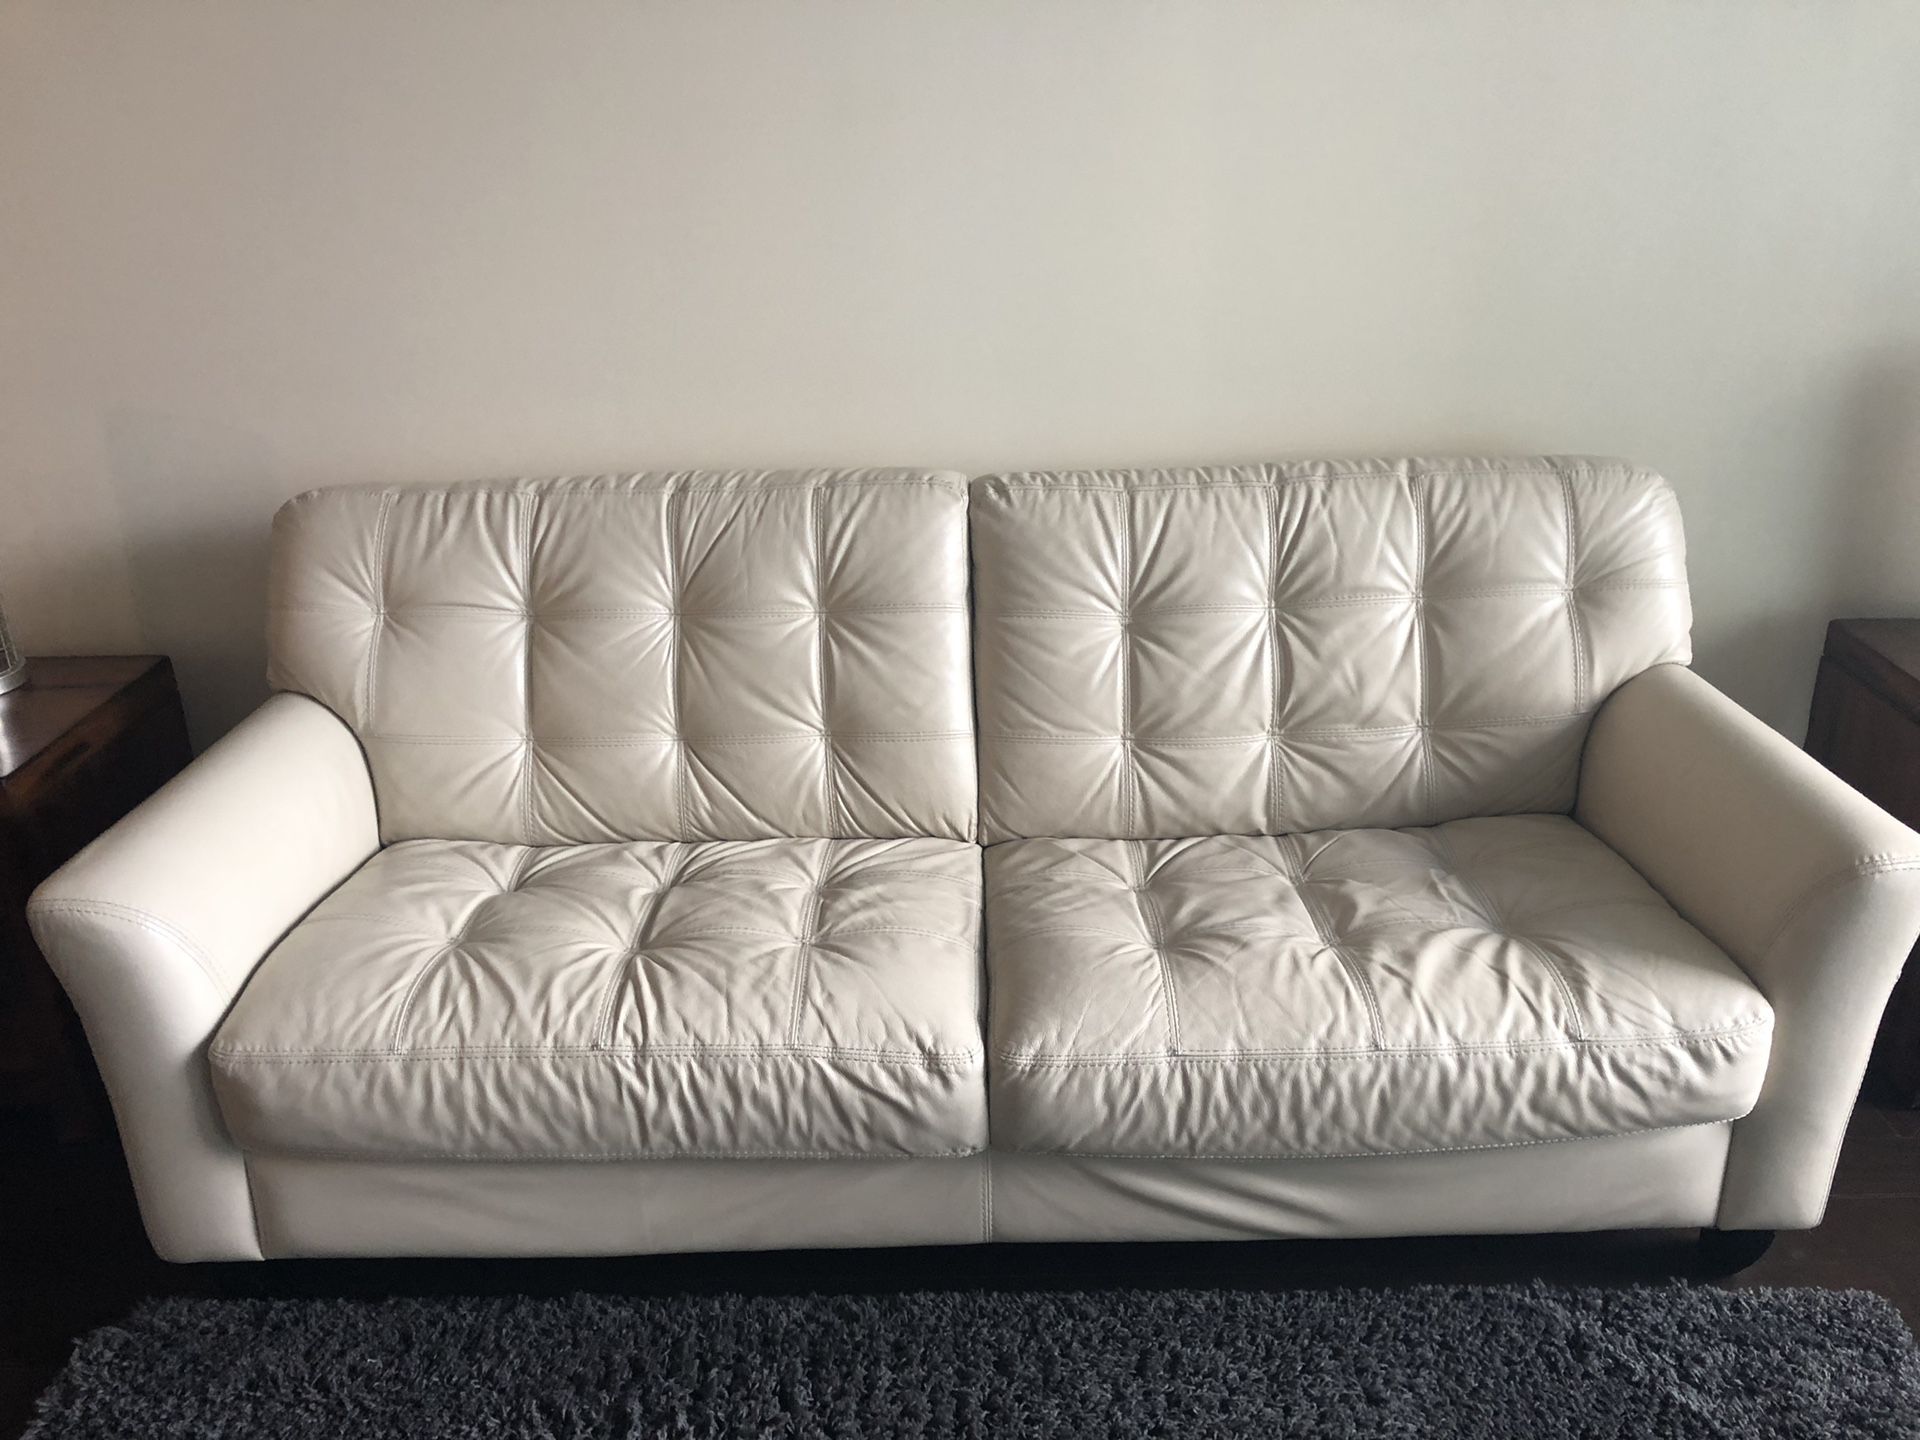 Ivory couch for sale. Recently cleaned and from a non smoking and no pet home.